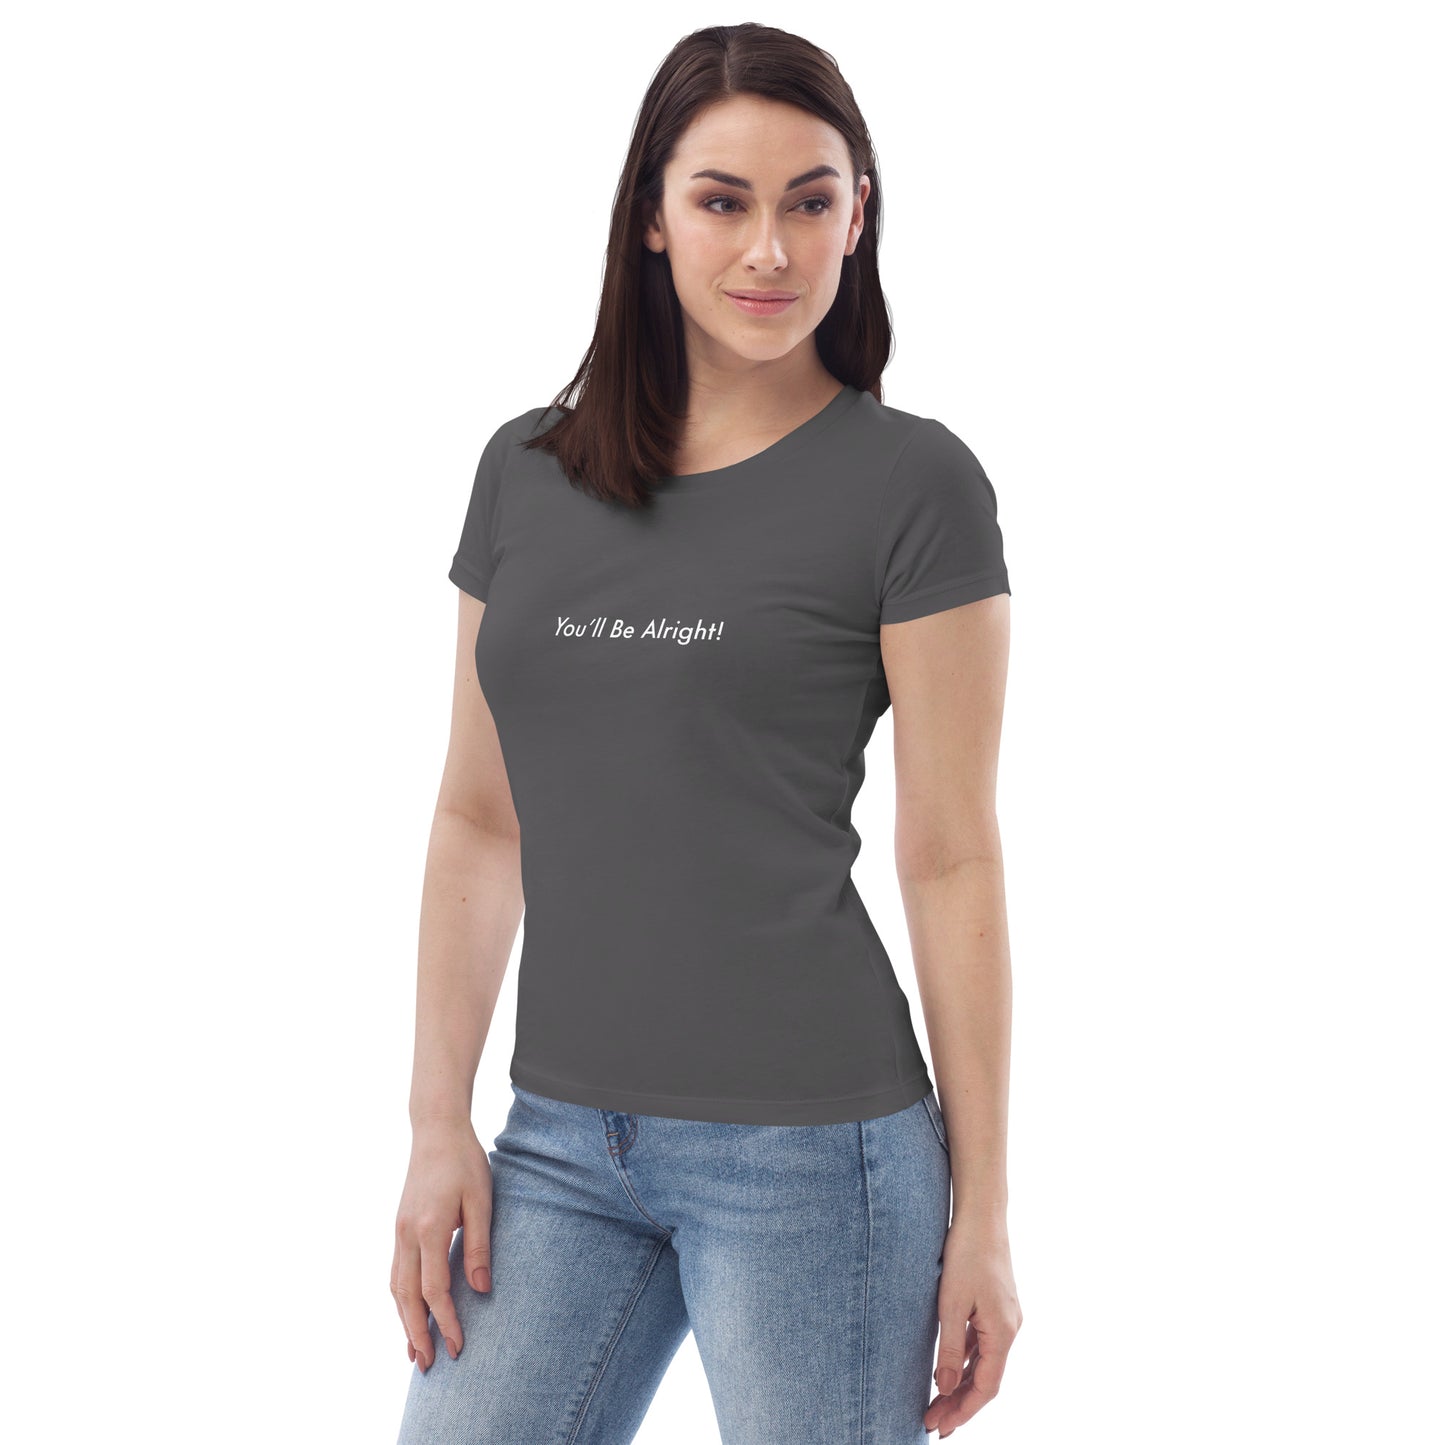 You'll Be Alright! Women's Fitted 100% Organic Cotton T-Shirt